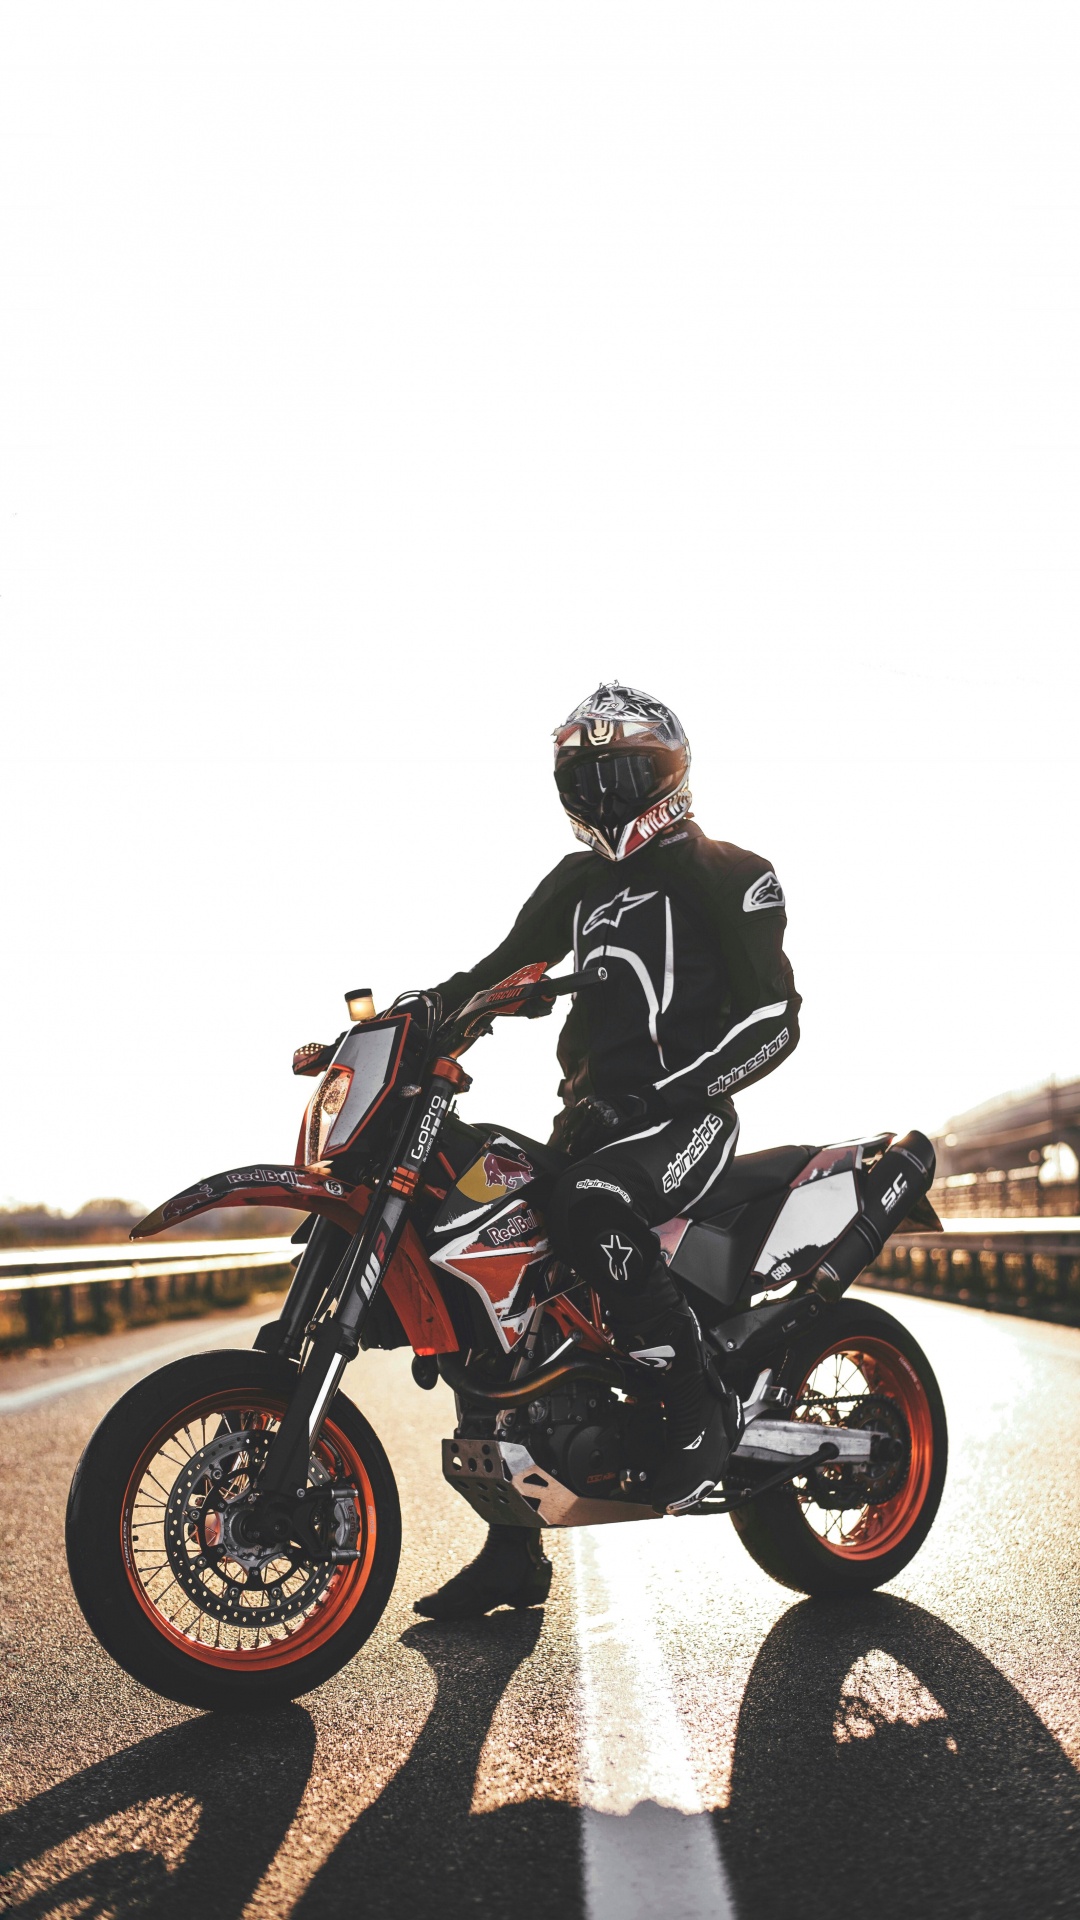 Man in Black Jacket Riding Motorcycle. Wallpaper in 1080x1920 Resolution